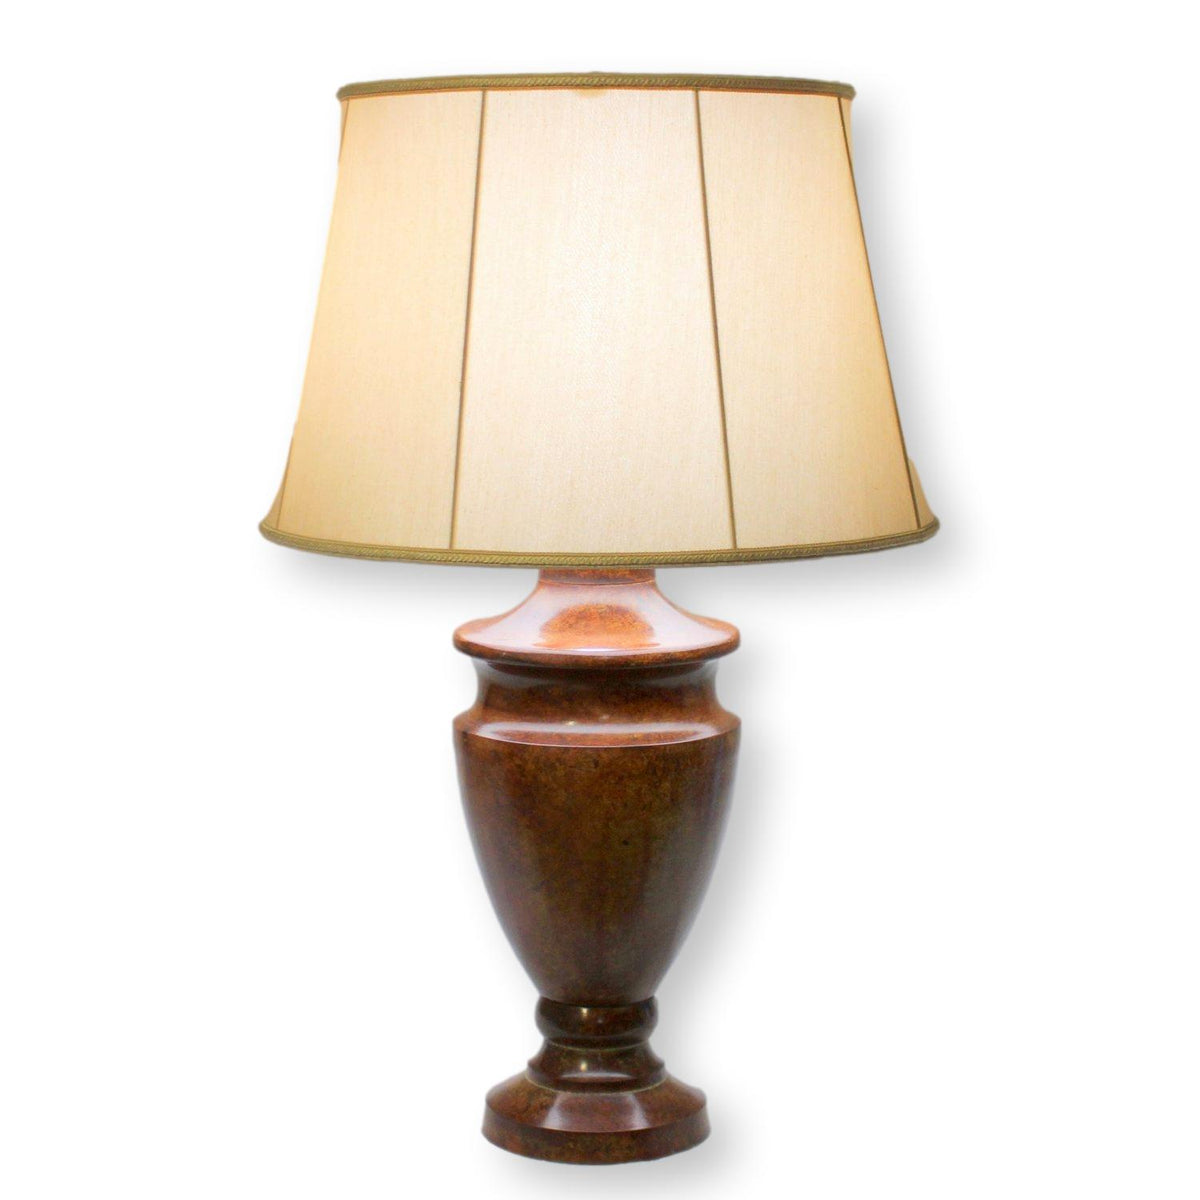 Classic Urn Shaped Table Lamp